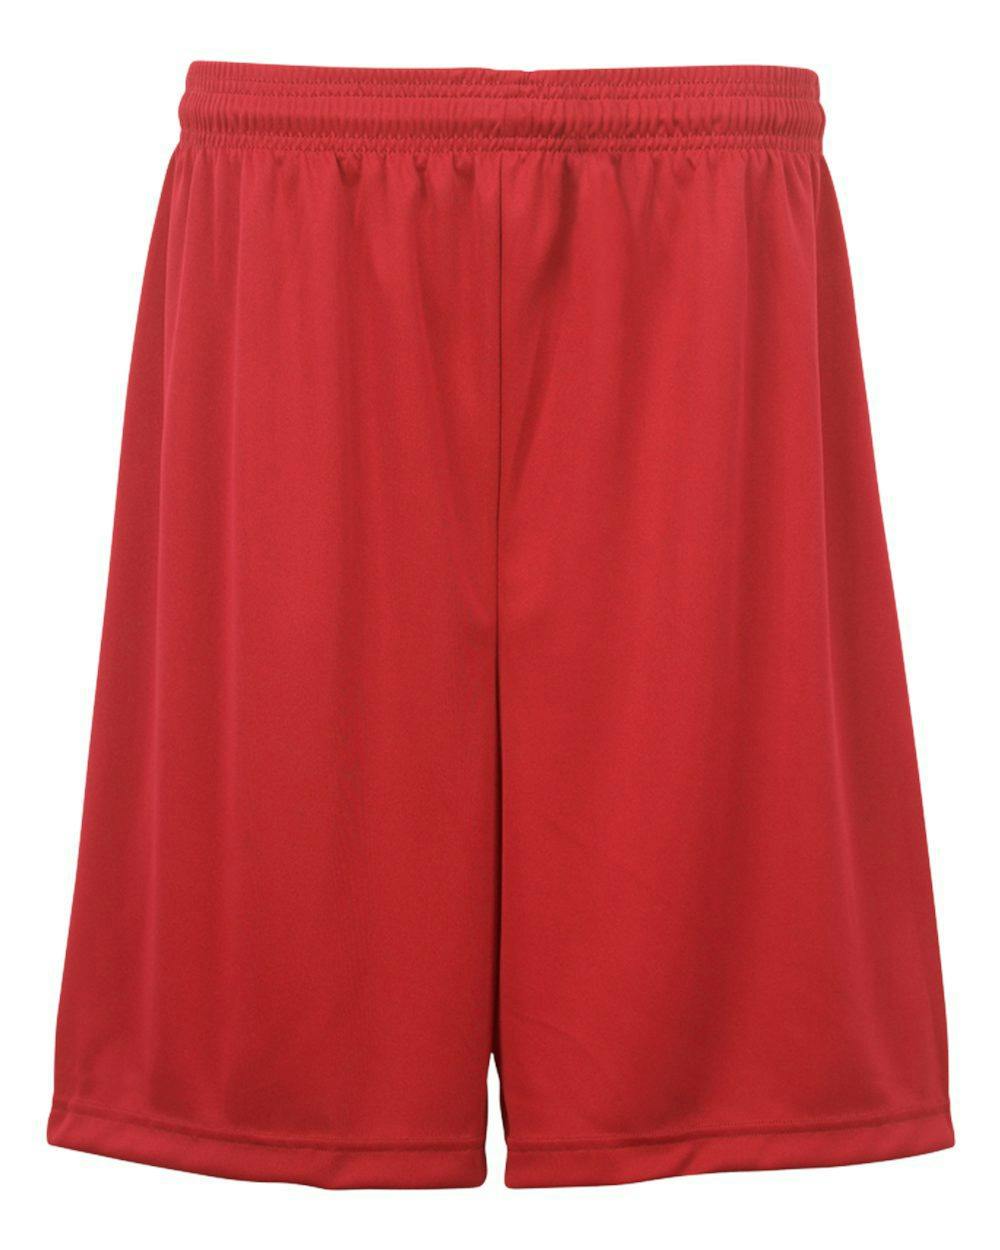 Image for Performance Shorts - 5129